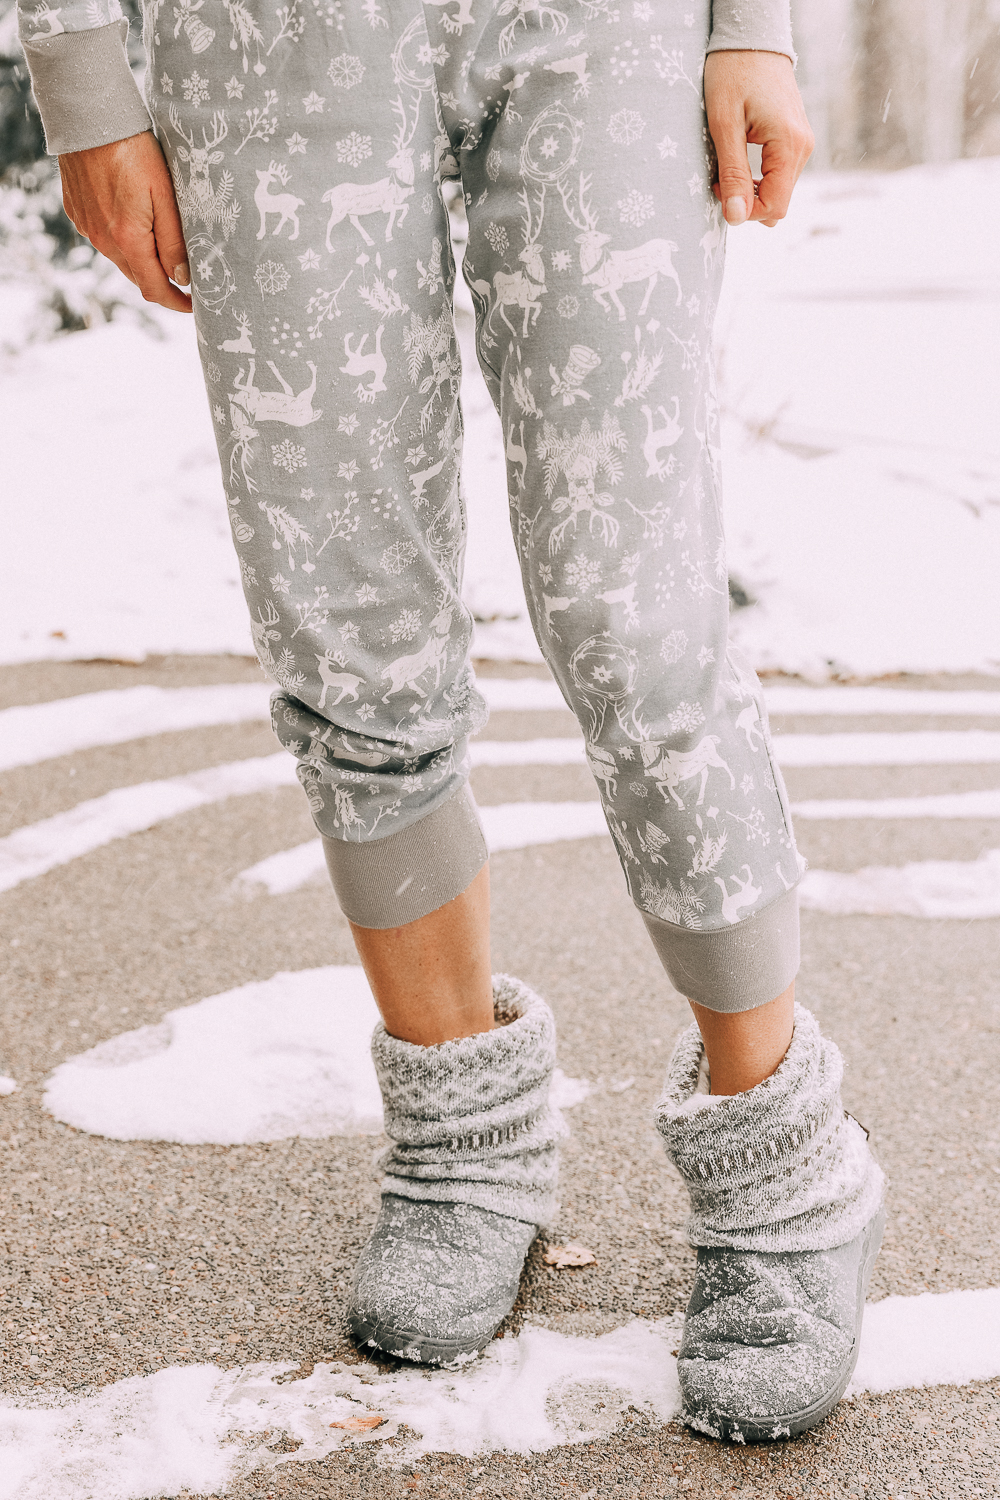 Holiday gift ideas featuring gray Muk Luk slipper boots from JCPenney